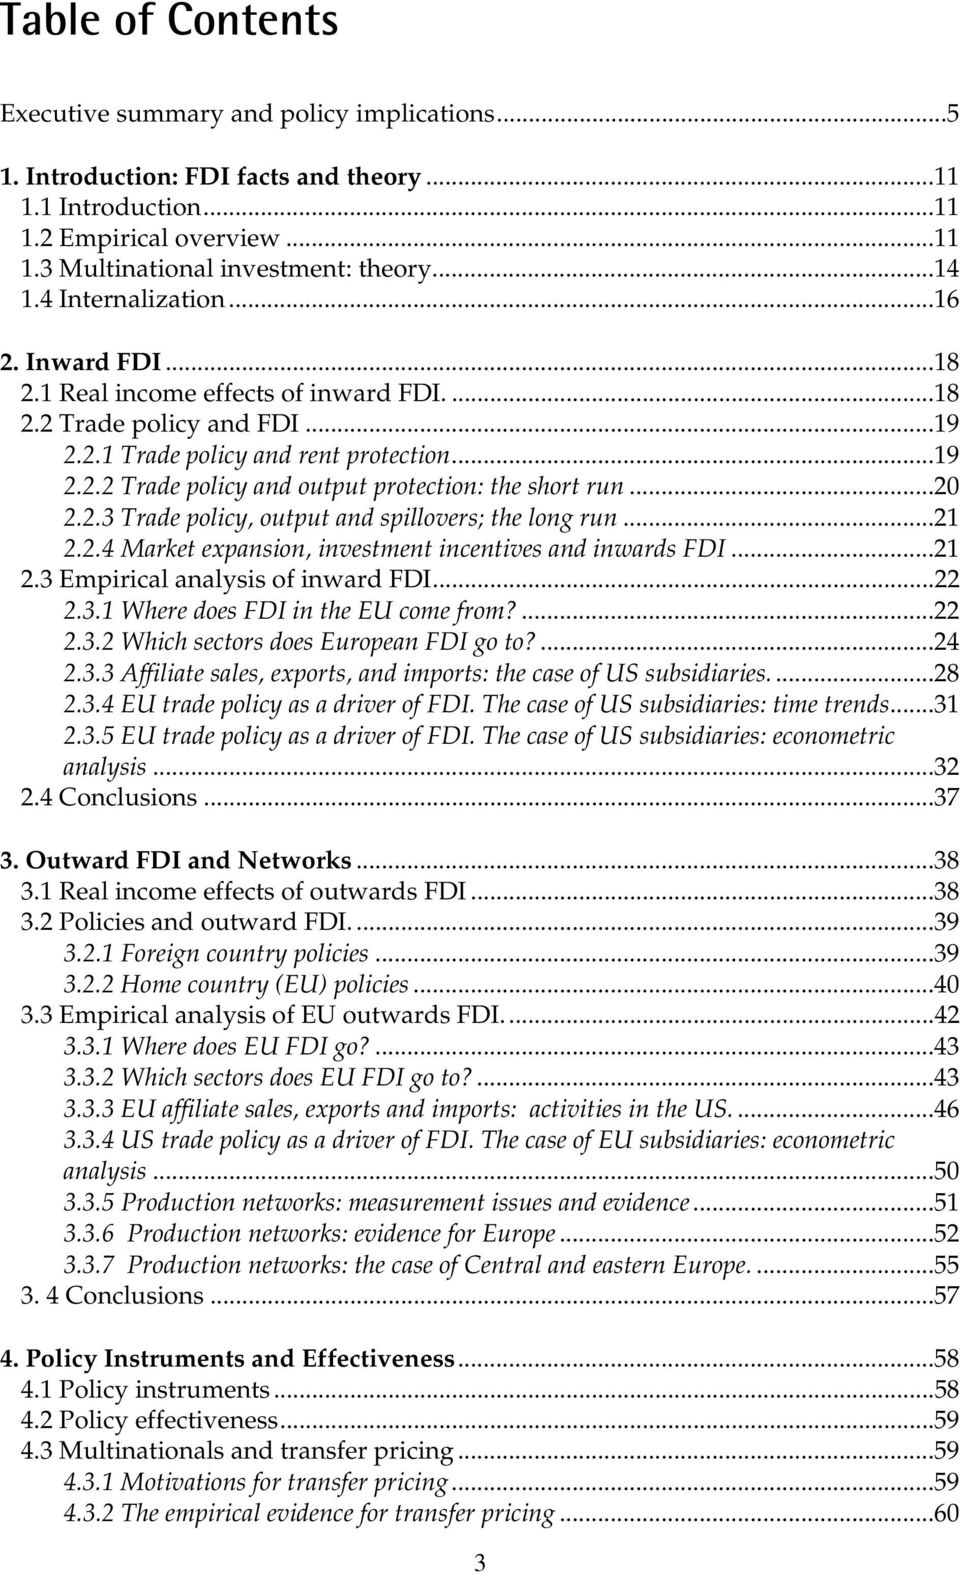 ..20 2.2.3 Trade policy, output and spillovers; the long run...21 2.2.4 Market expansion, investment incentives and inwards FDI...21 2.3 Empirical analysis of inward FDI...22 2.3.1 Where does FDI in the EU come from?